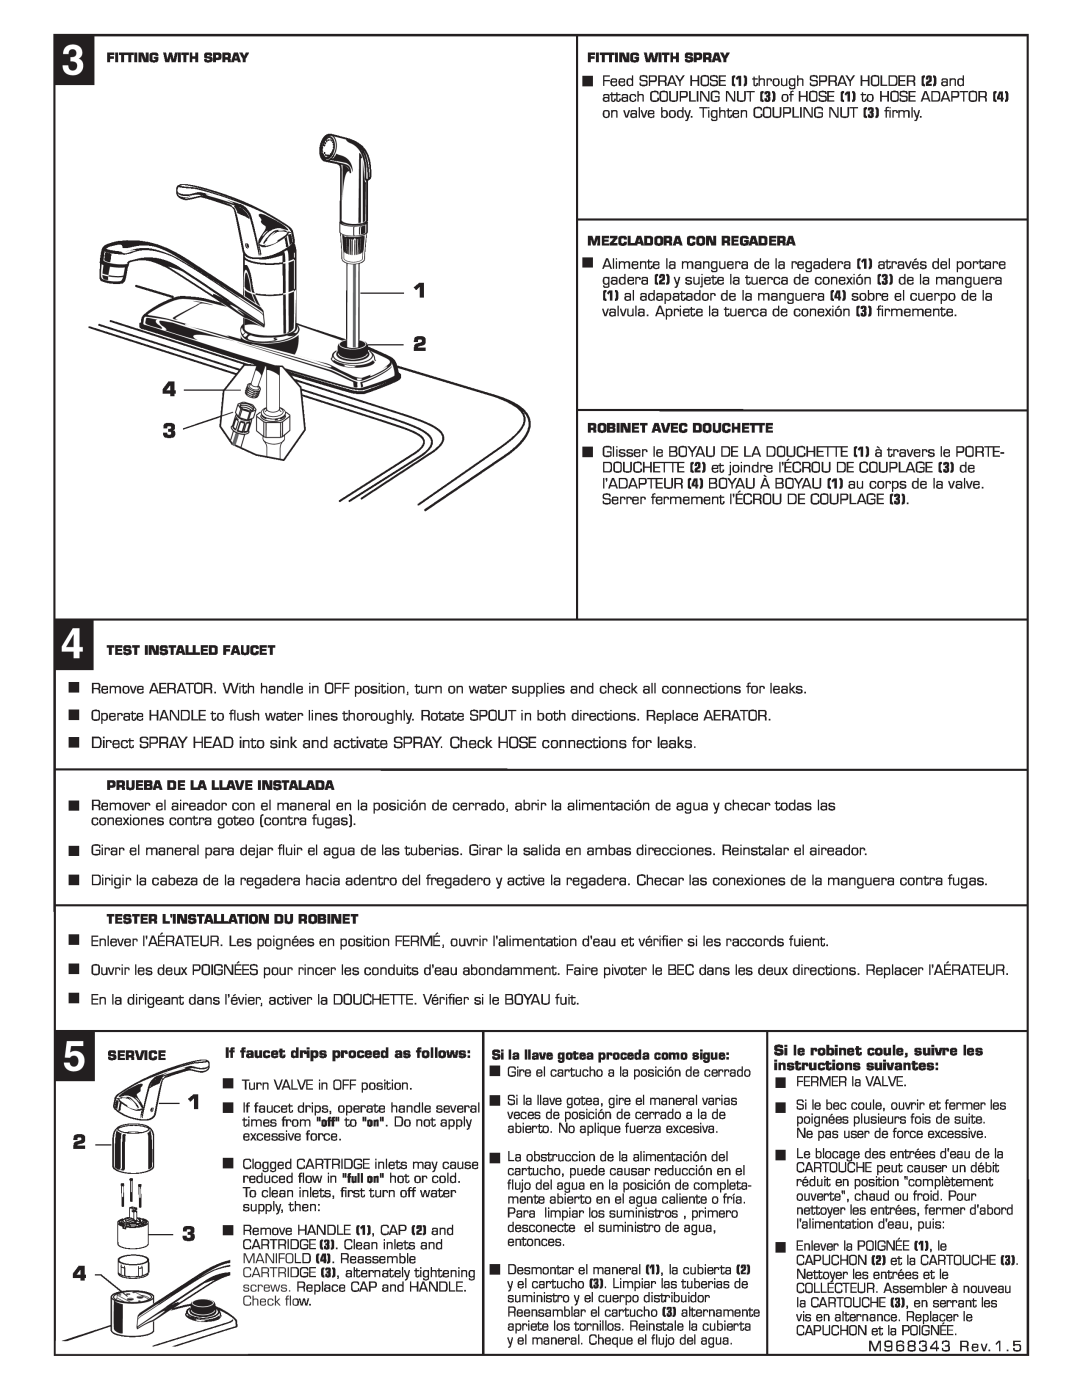 American Standard 4175.203, COLONY SINGLE CONTROL KITCHEN FAUCET If faucet drips proceed as follows 